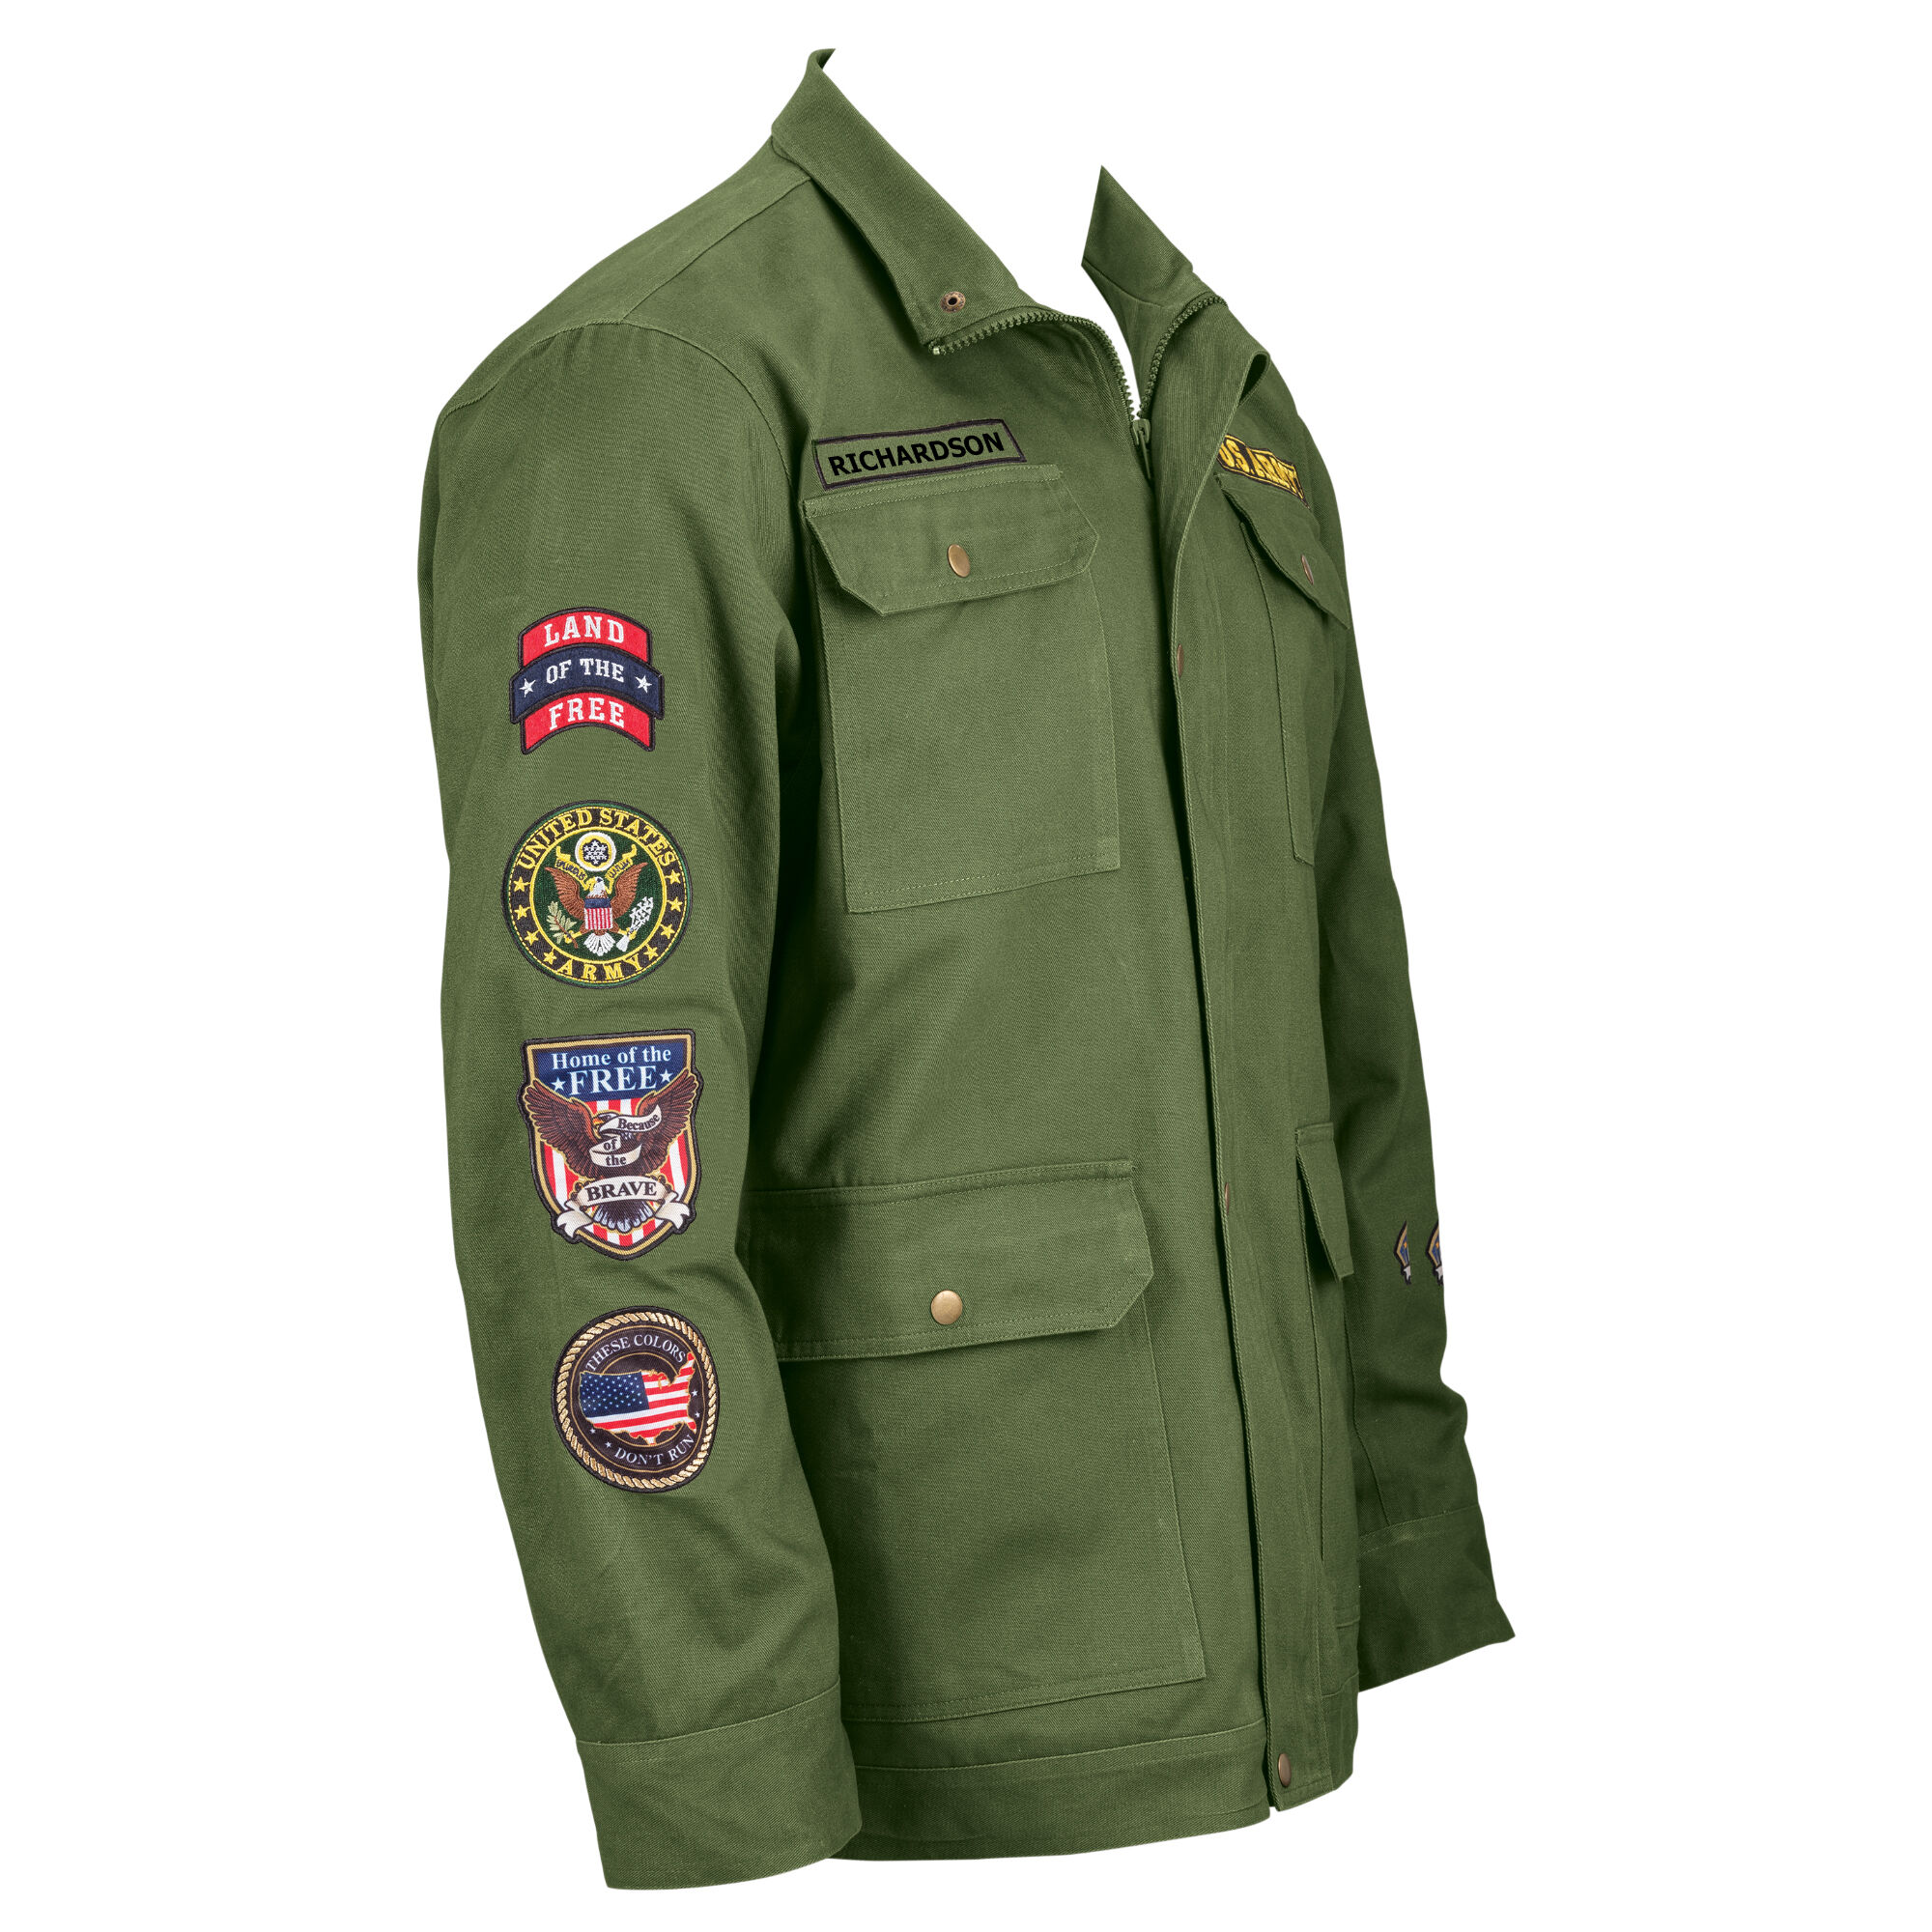 Personalized US Army Field Jacket 10539 0017 c leftside